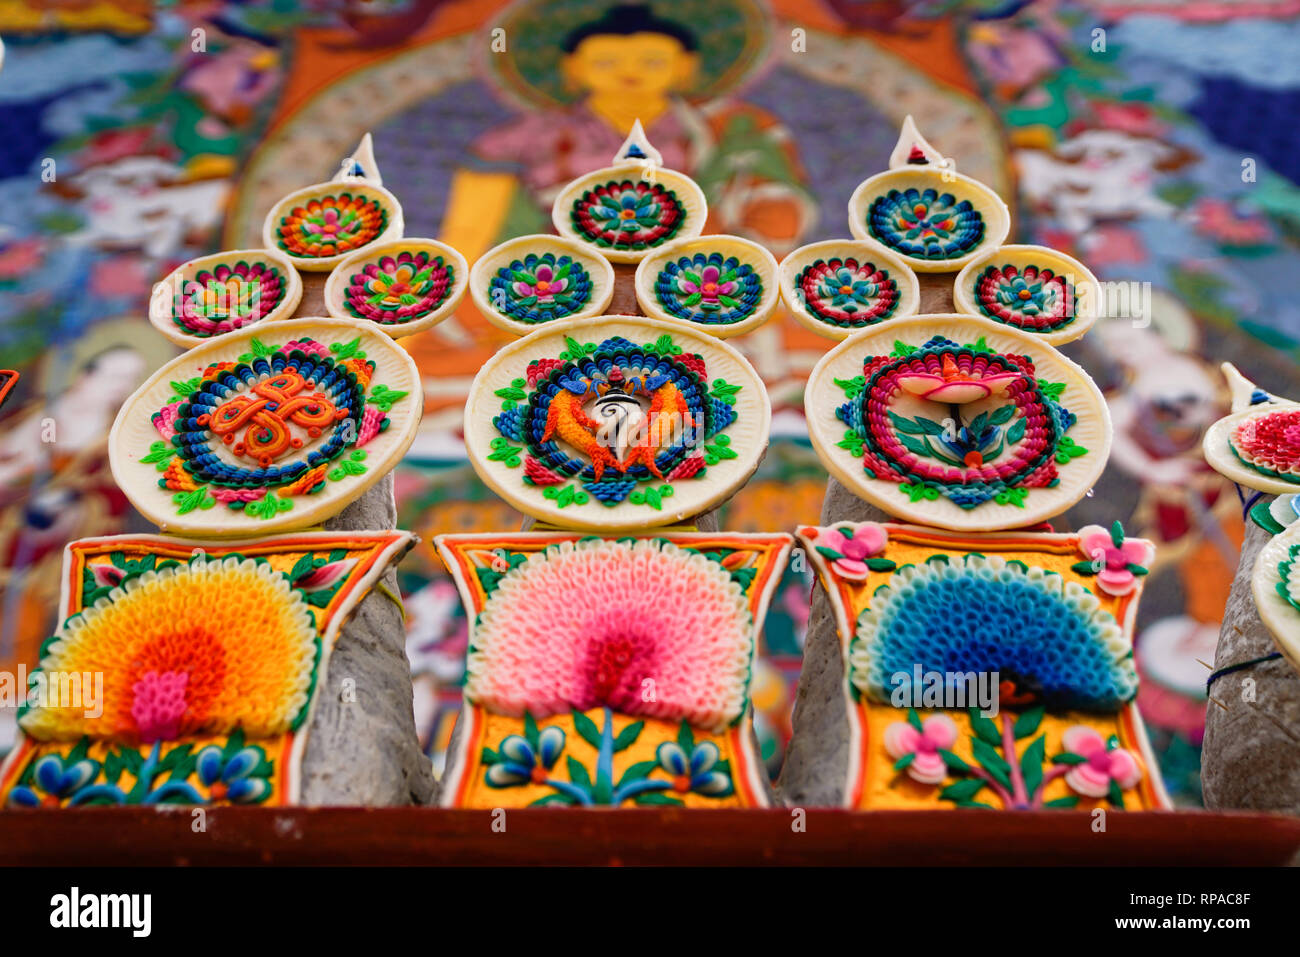 (190221) -- LHASA, Feb. 21, 2019 (Xinhua) -- Butter sculptures are displayed during a Cham dance ritual at the Qoide Monastery in Gonggar County of Shannan Prefecture, southwest China's Tibet Autonomous Region, Feb. 19, 2019. Dressed in colorful costumes, lamas danced to pounding drums at the Qoide Monastery during the Tibetan New Year celebrations.      The Cham dance is a vibrant masked and costumed ritual performed by Tibetan Buddhist monks to exorcise evils and pray for blessings.     The Qoide Monastery has a 500-year history of performing the Cham dance.     The Cham dance here was liste Stock Photo